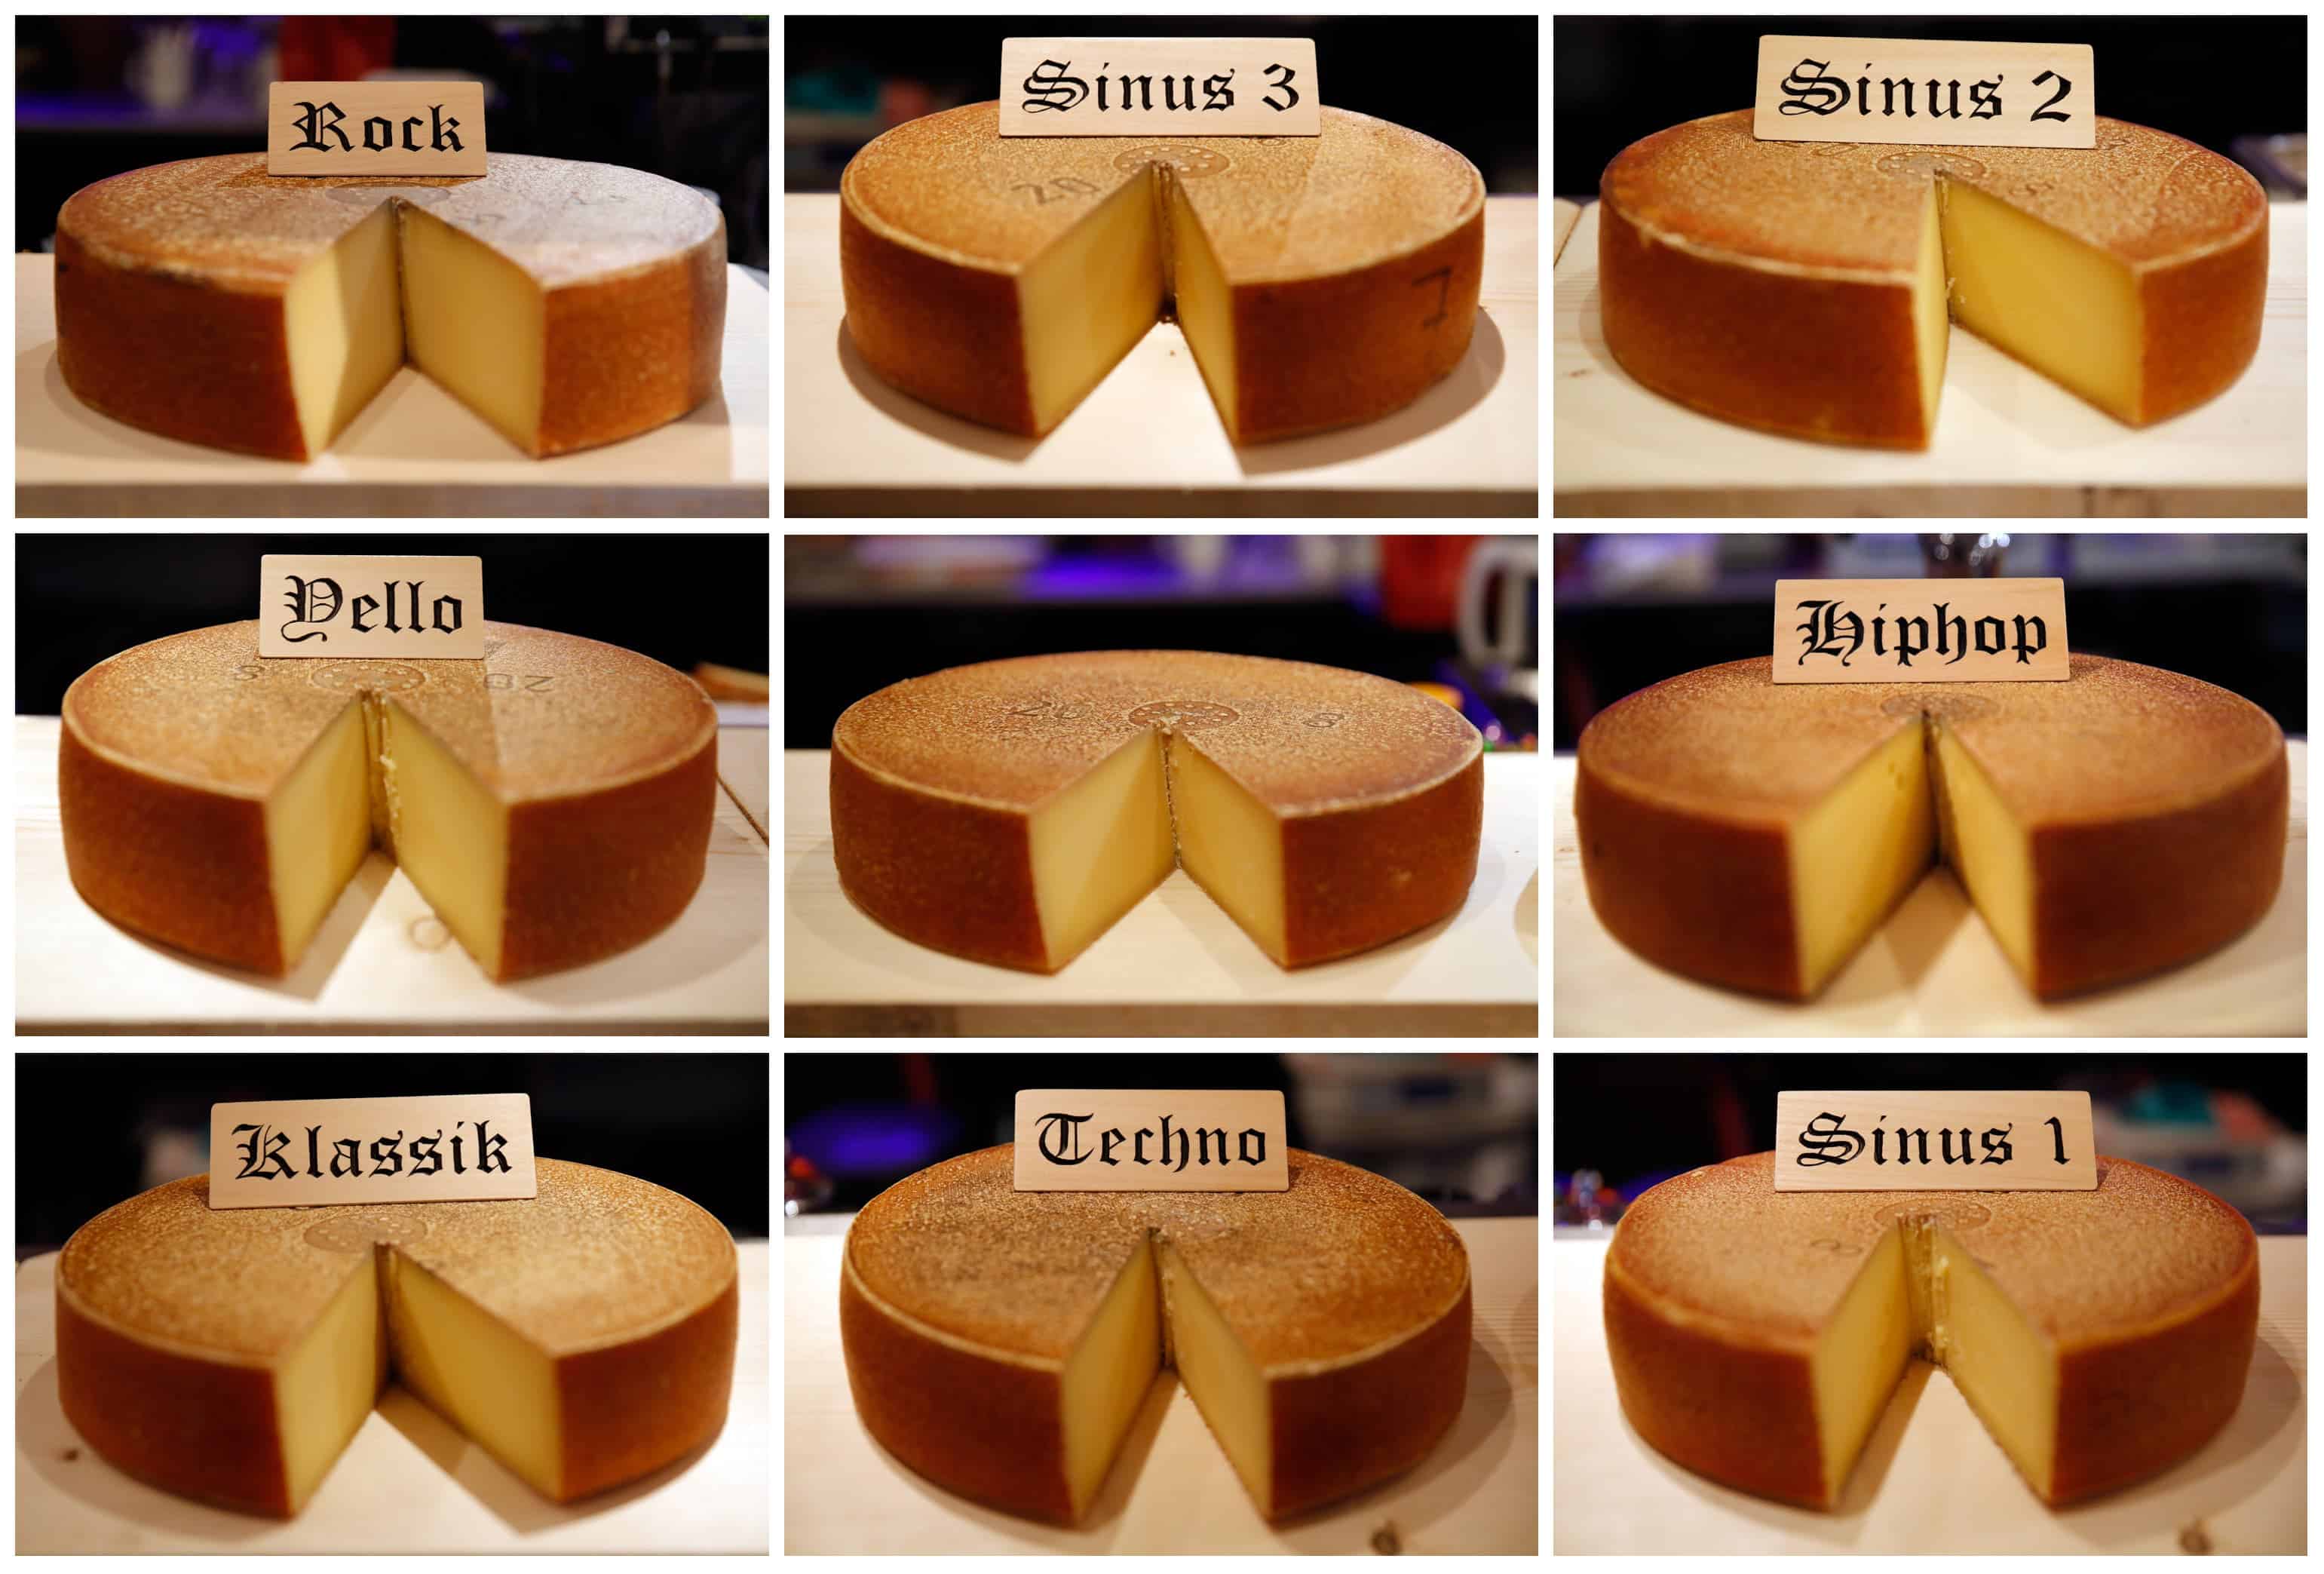 9 22-pound wheels of Emmental cheese exposed to different genres of music over a six-month period for the experiment.